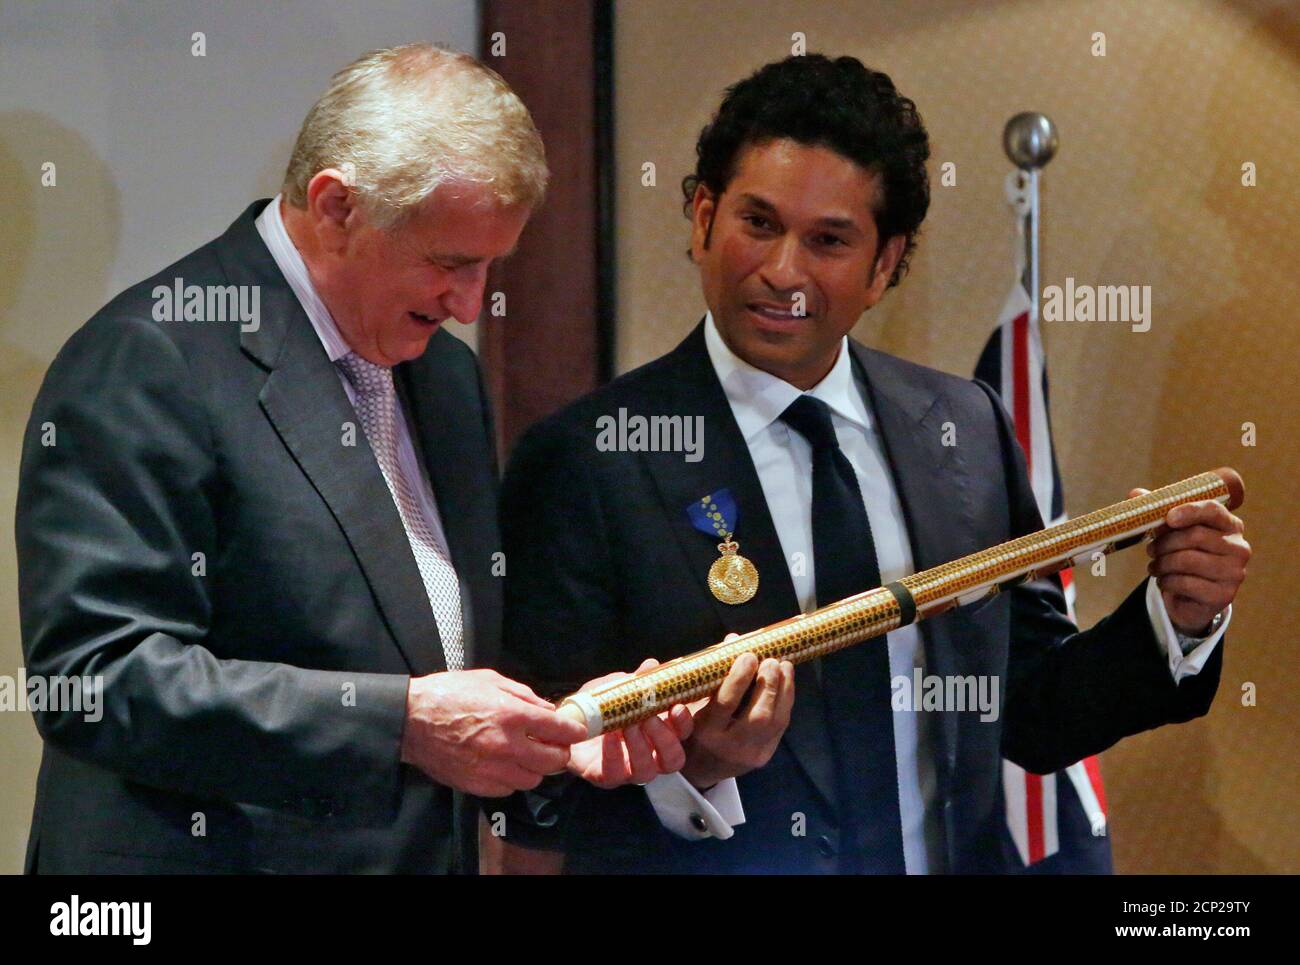 Indian cricket player Sachin Tendulkar (R) and Australia's Minister for the Arts and Regional Australia Simon Crean hold a cricket stump painted by an Australian aboriginal artist during a ceremony at a hotel in Mumbai, November 6, 2012. Tendulkar was conferred the Order of Australia medal at the ceremony for his achievements and contribution to international cricket and for promoting bilateral ties between Australia and India. REUTERS/Vivek Prakash (INDIA - Tags: SPORT CRICKET) Stock Photo